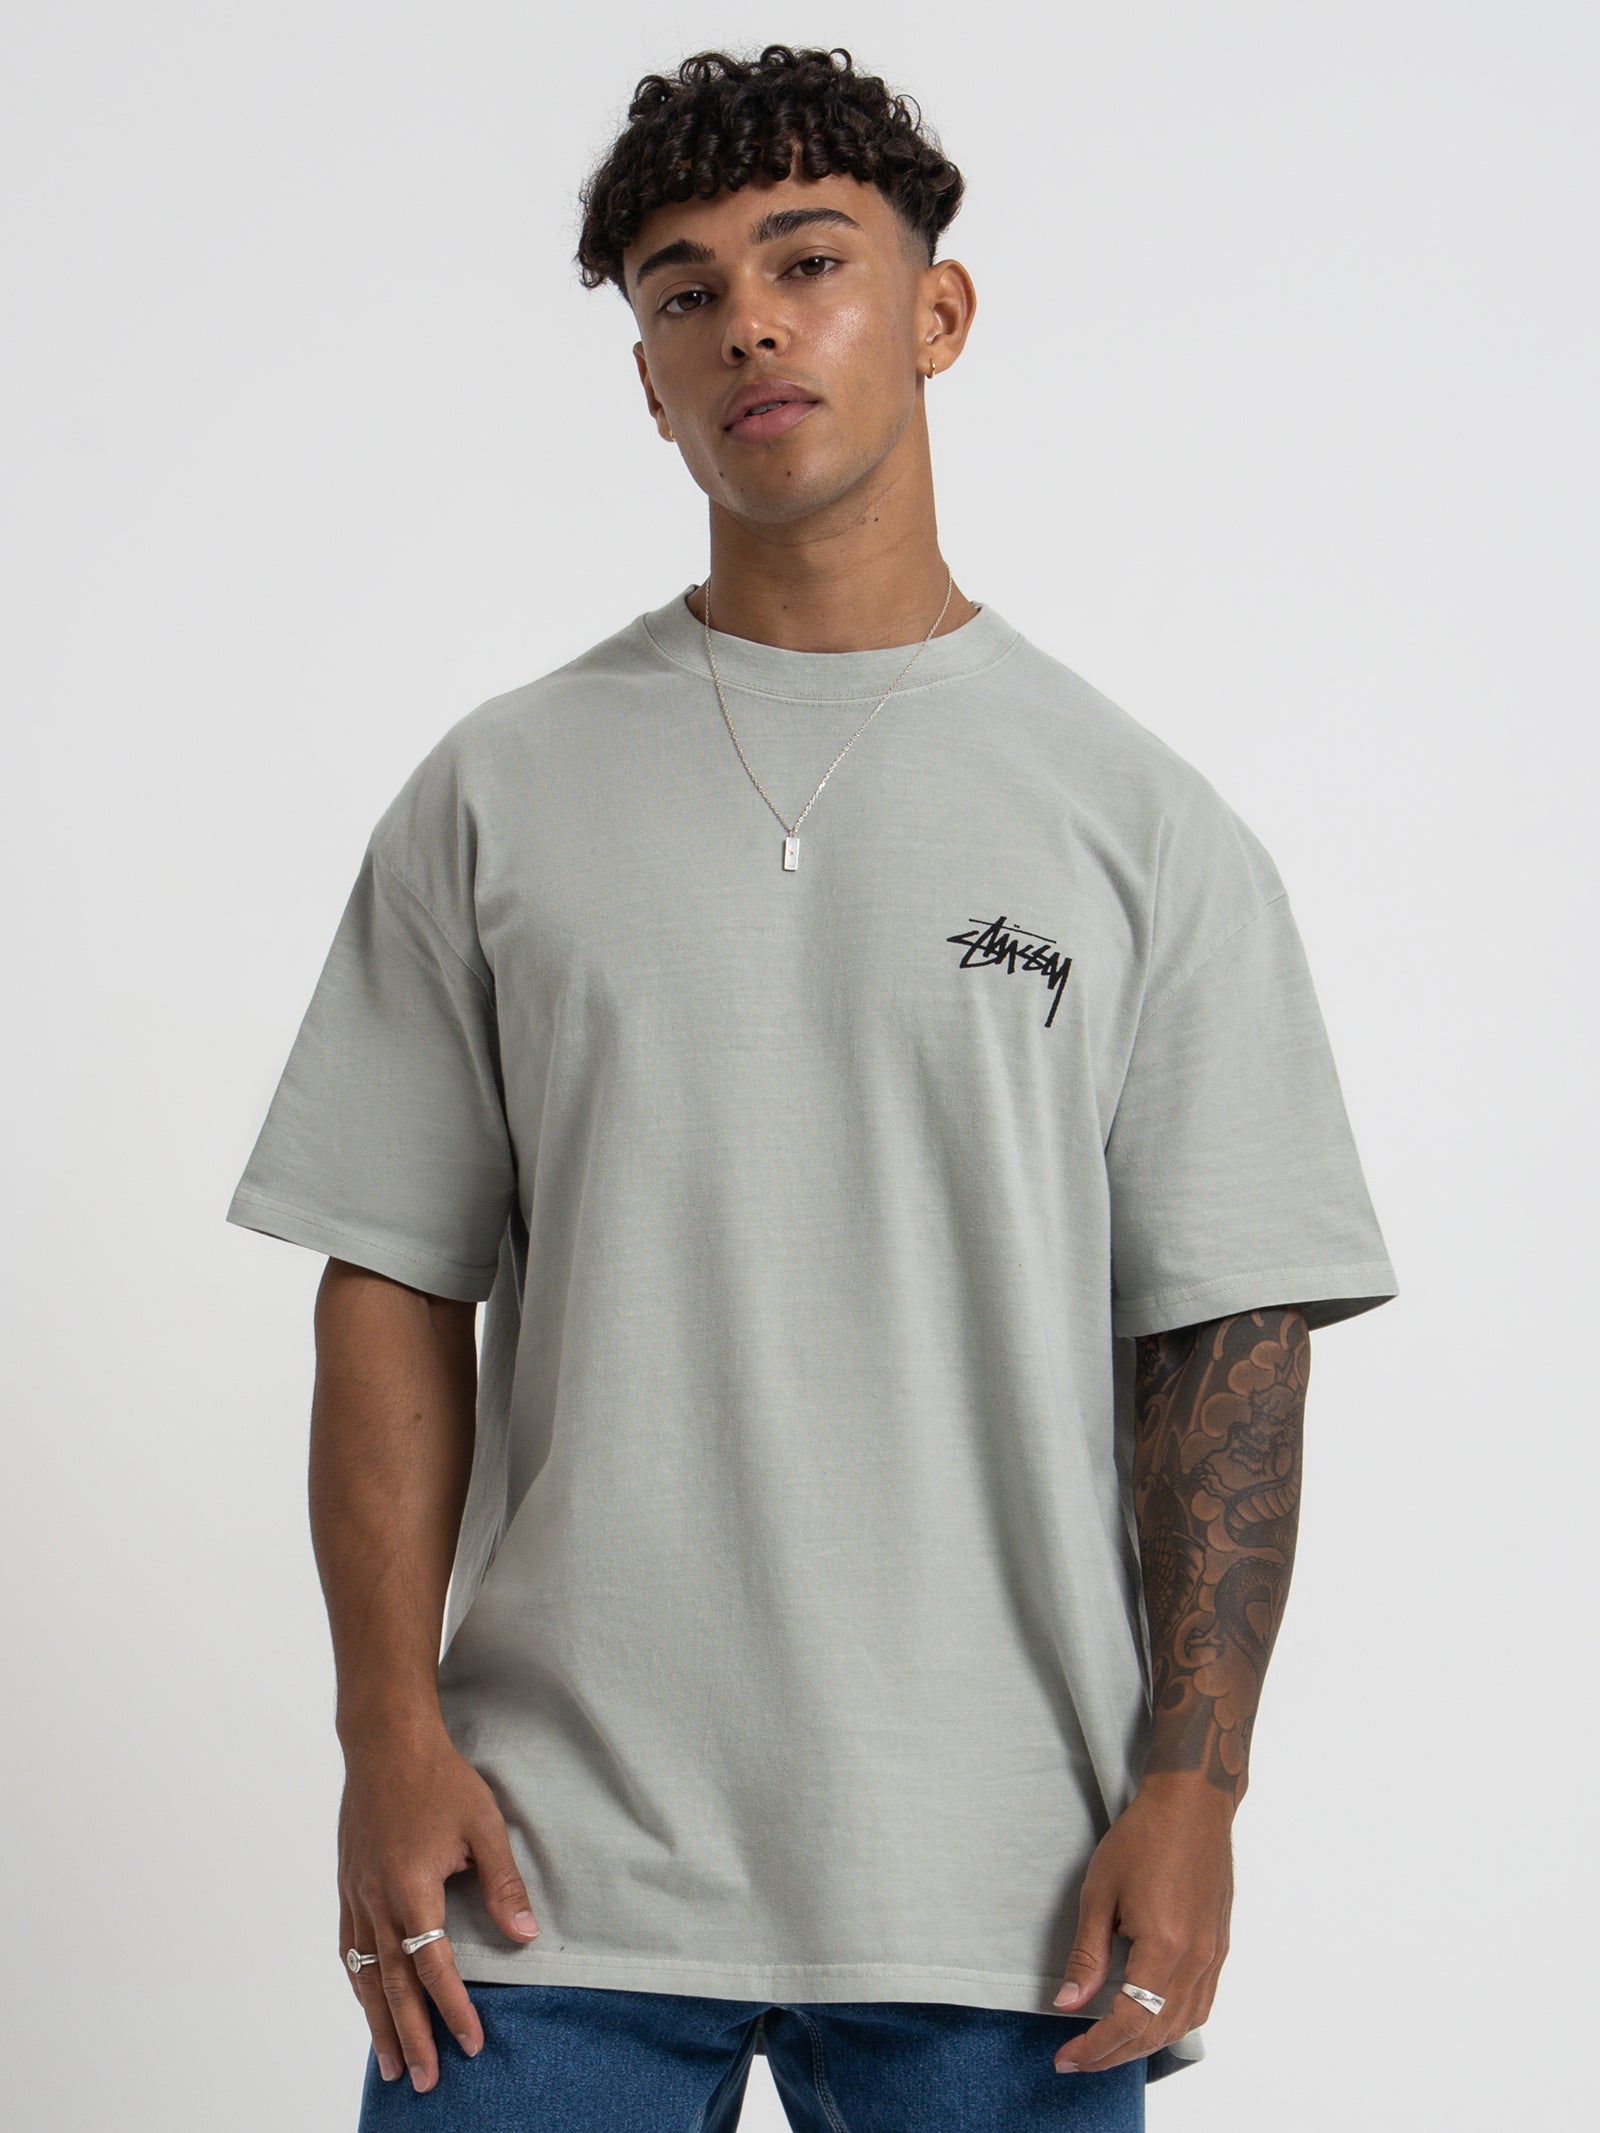 House of Cards Short Sleeve T-Shirt in Pigment Stone Grey - Glue Store